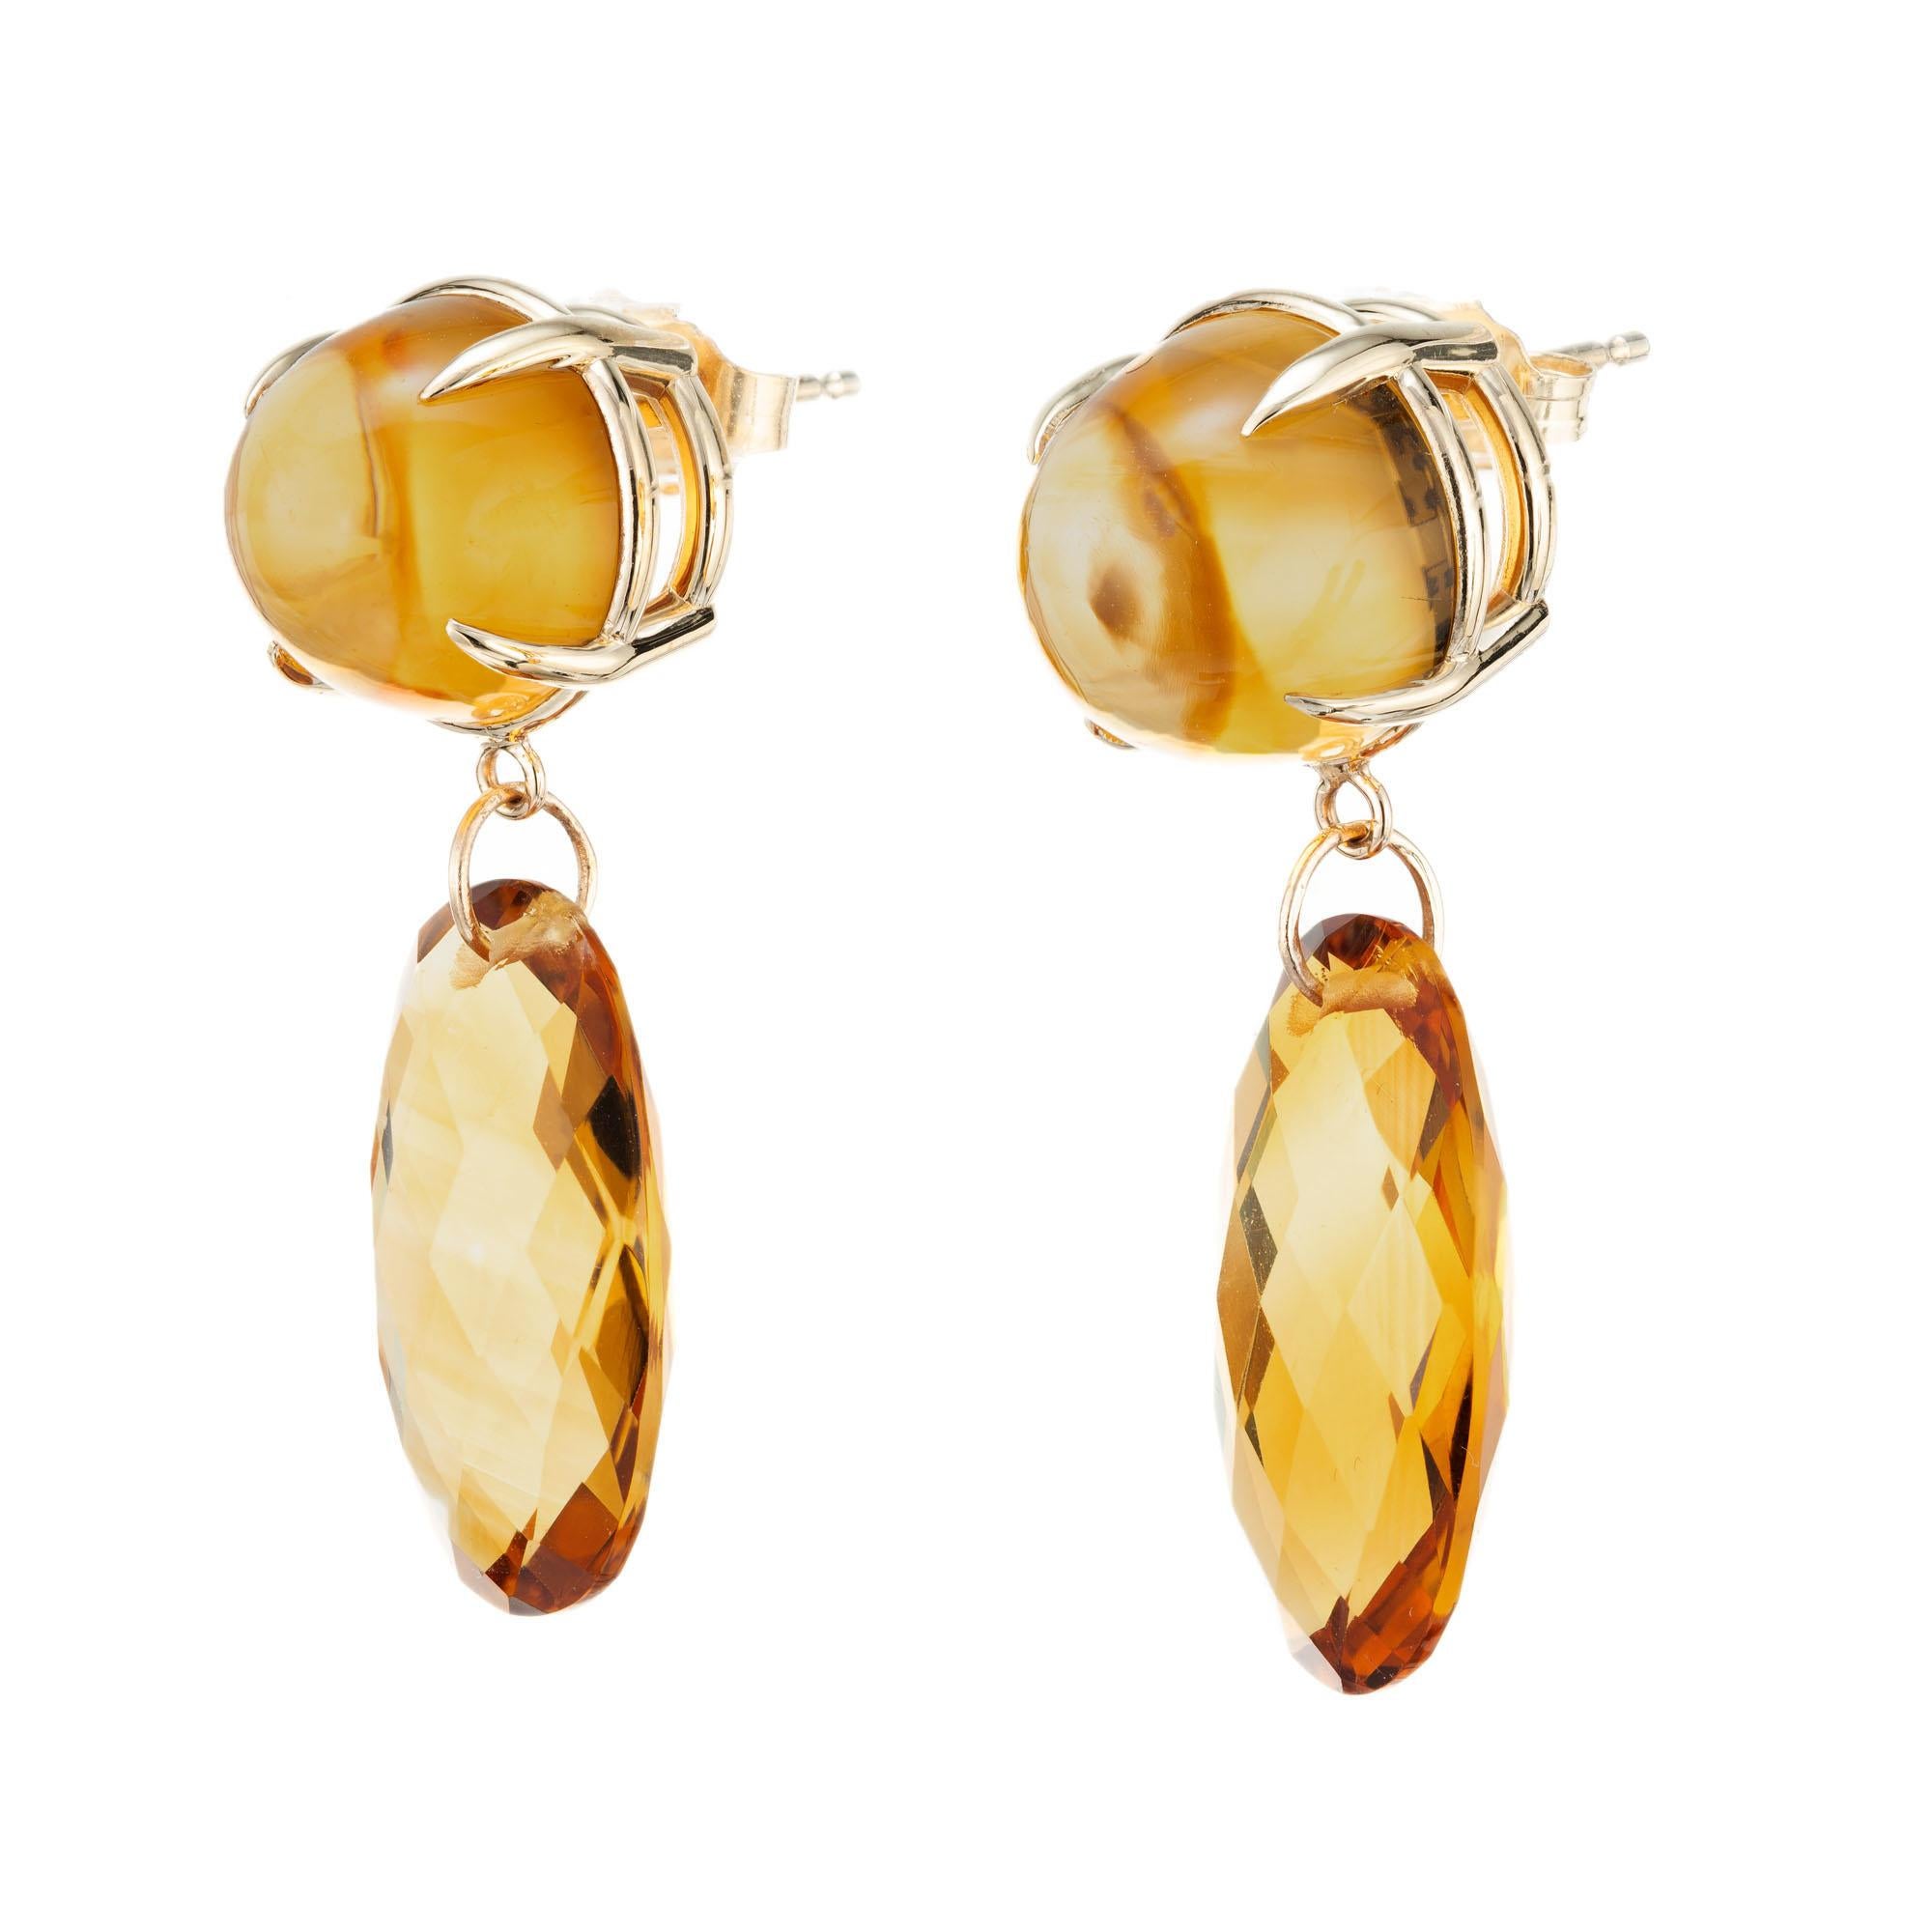 Citrine dangle earrings. Natural untreated round high dome faceted cabochon tops with two oval briolette citrine dangles. Designed and crafted in the Peter Suchy Workshop

2 round yellowish orange cabochon citrines, approx. 10.33cts
2 oval faceted